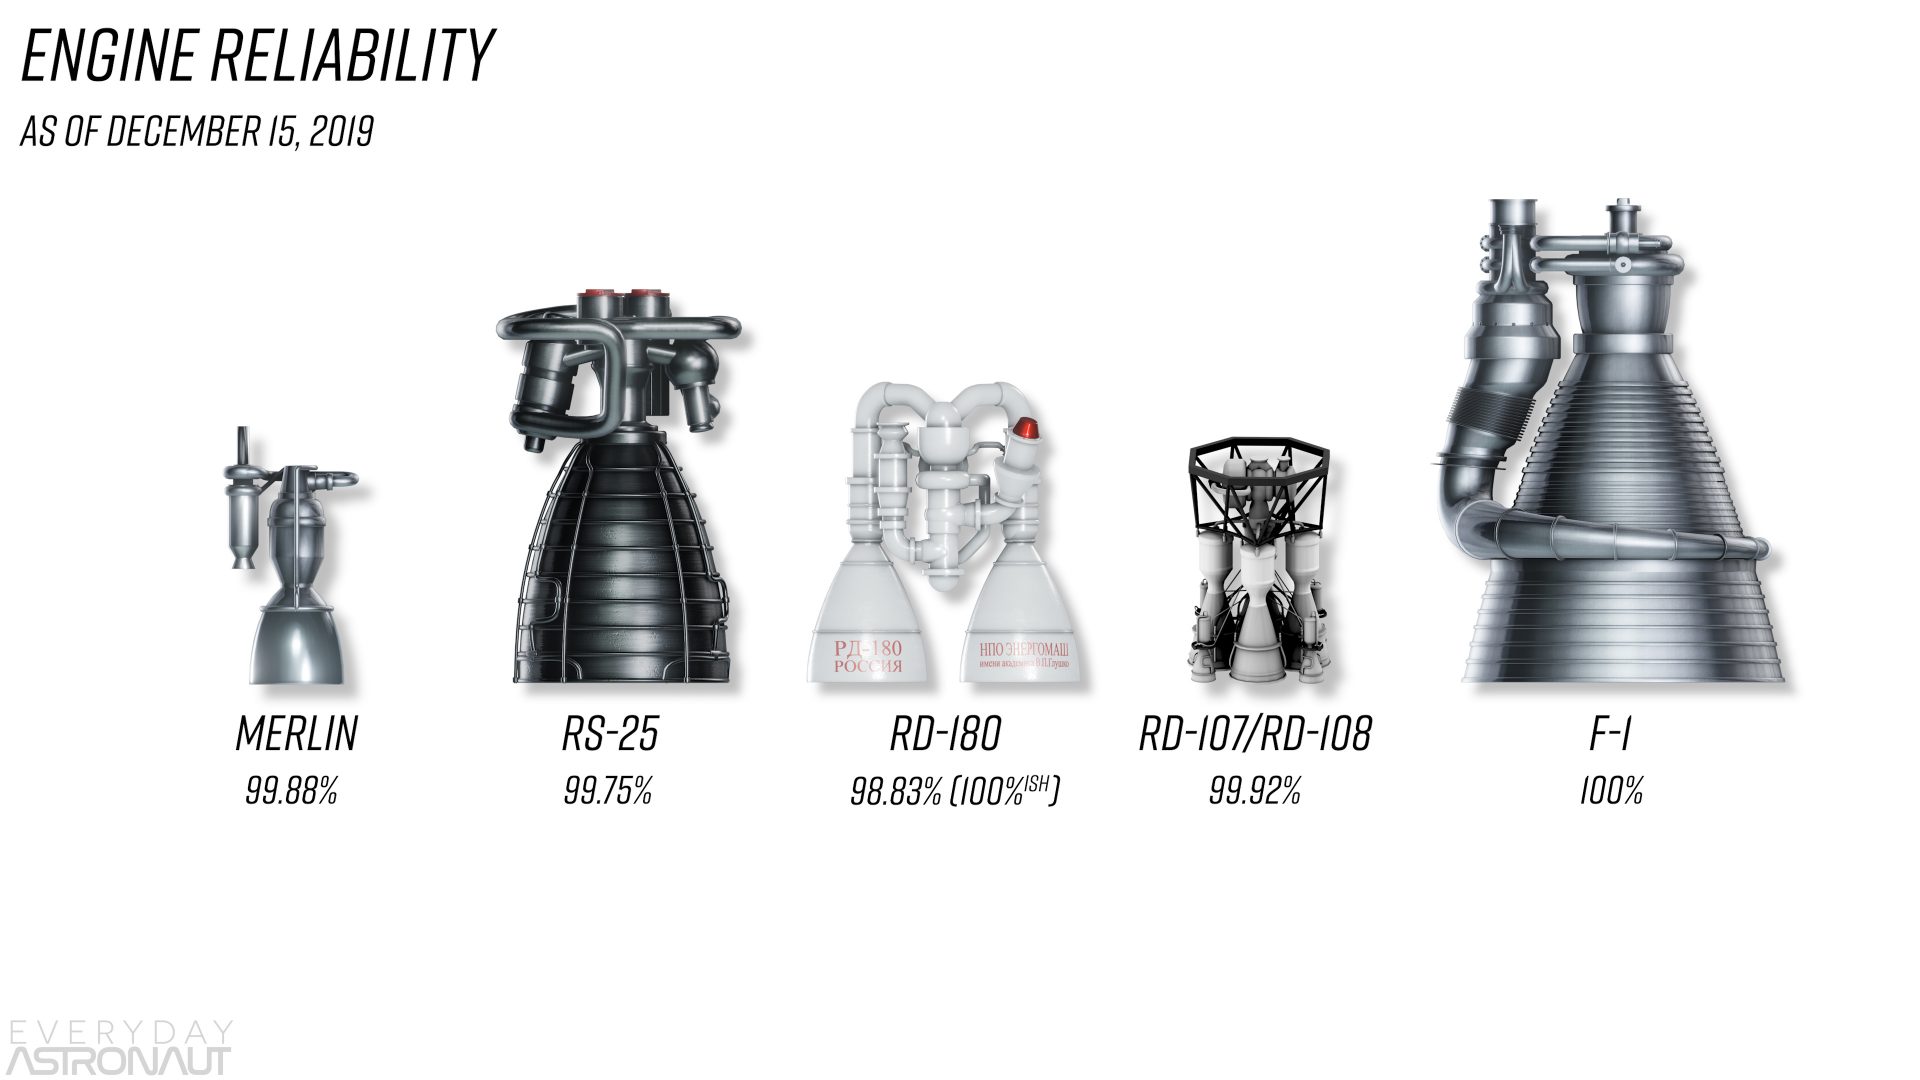 Rocket Engine Reliability merlin RS-25 rd-180 rd-107 rd-108 F-1 engine